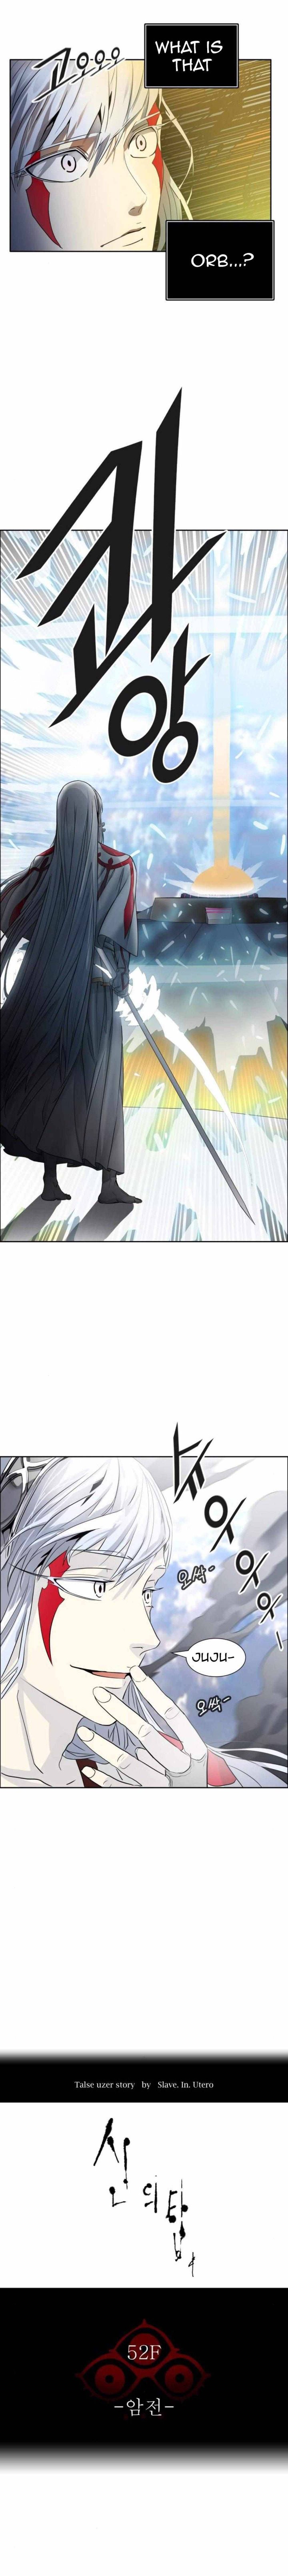 Tower Of God Chapter 499 Page 7